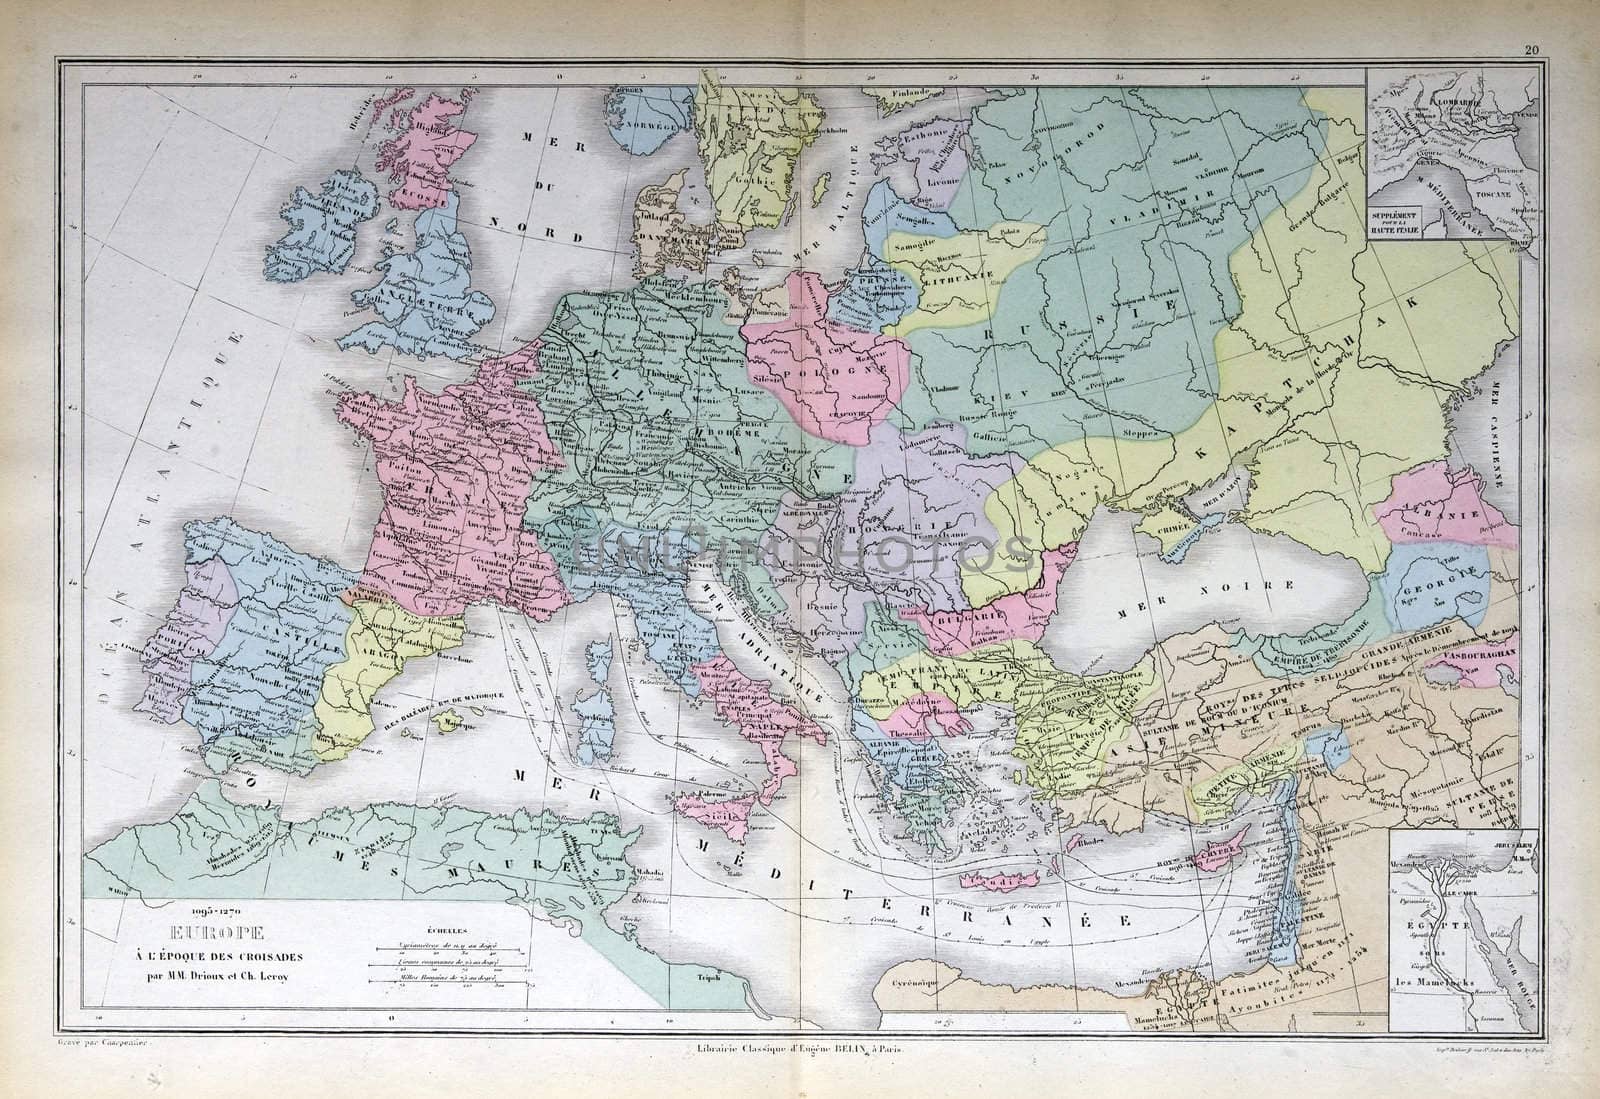 Atlas Of Drioux and Leroy from 1883. Published in Paris, France, Europe.